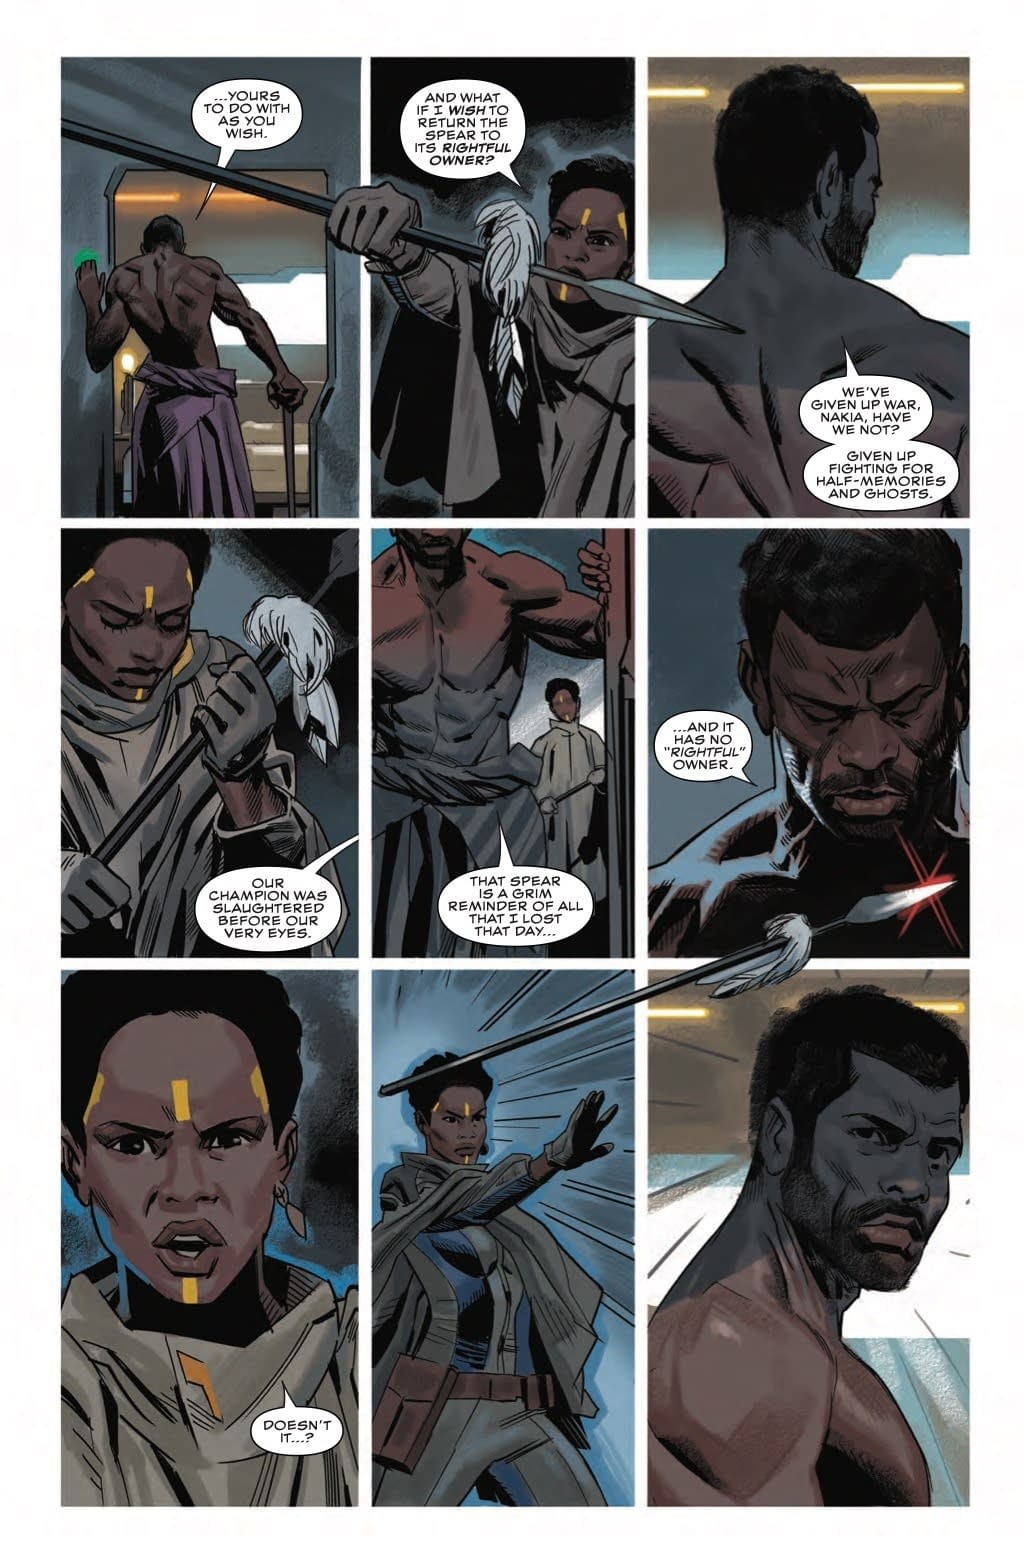 Jogging the Black Panther's Memory in Preview of Next Week's Black Panther #5